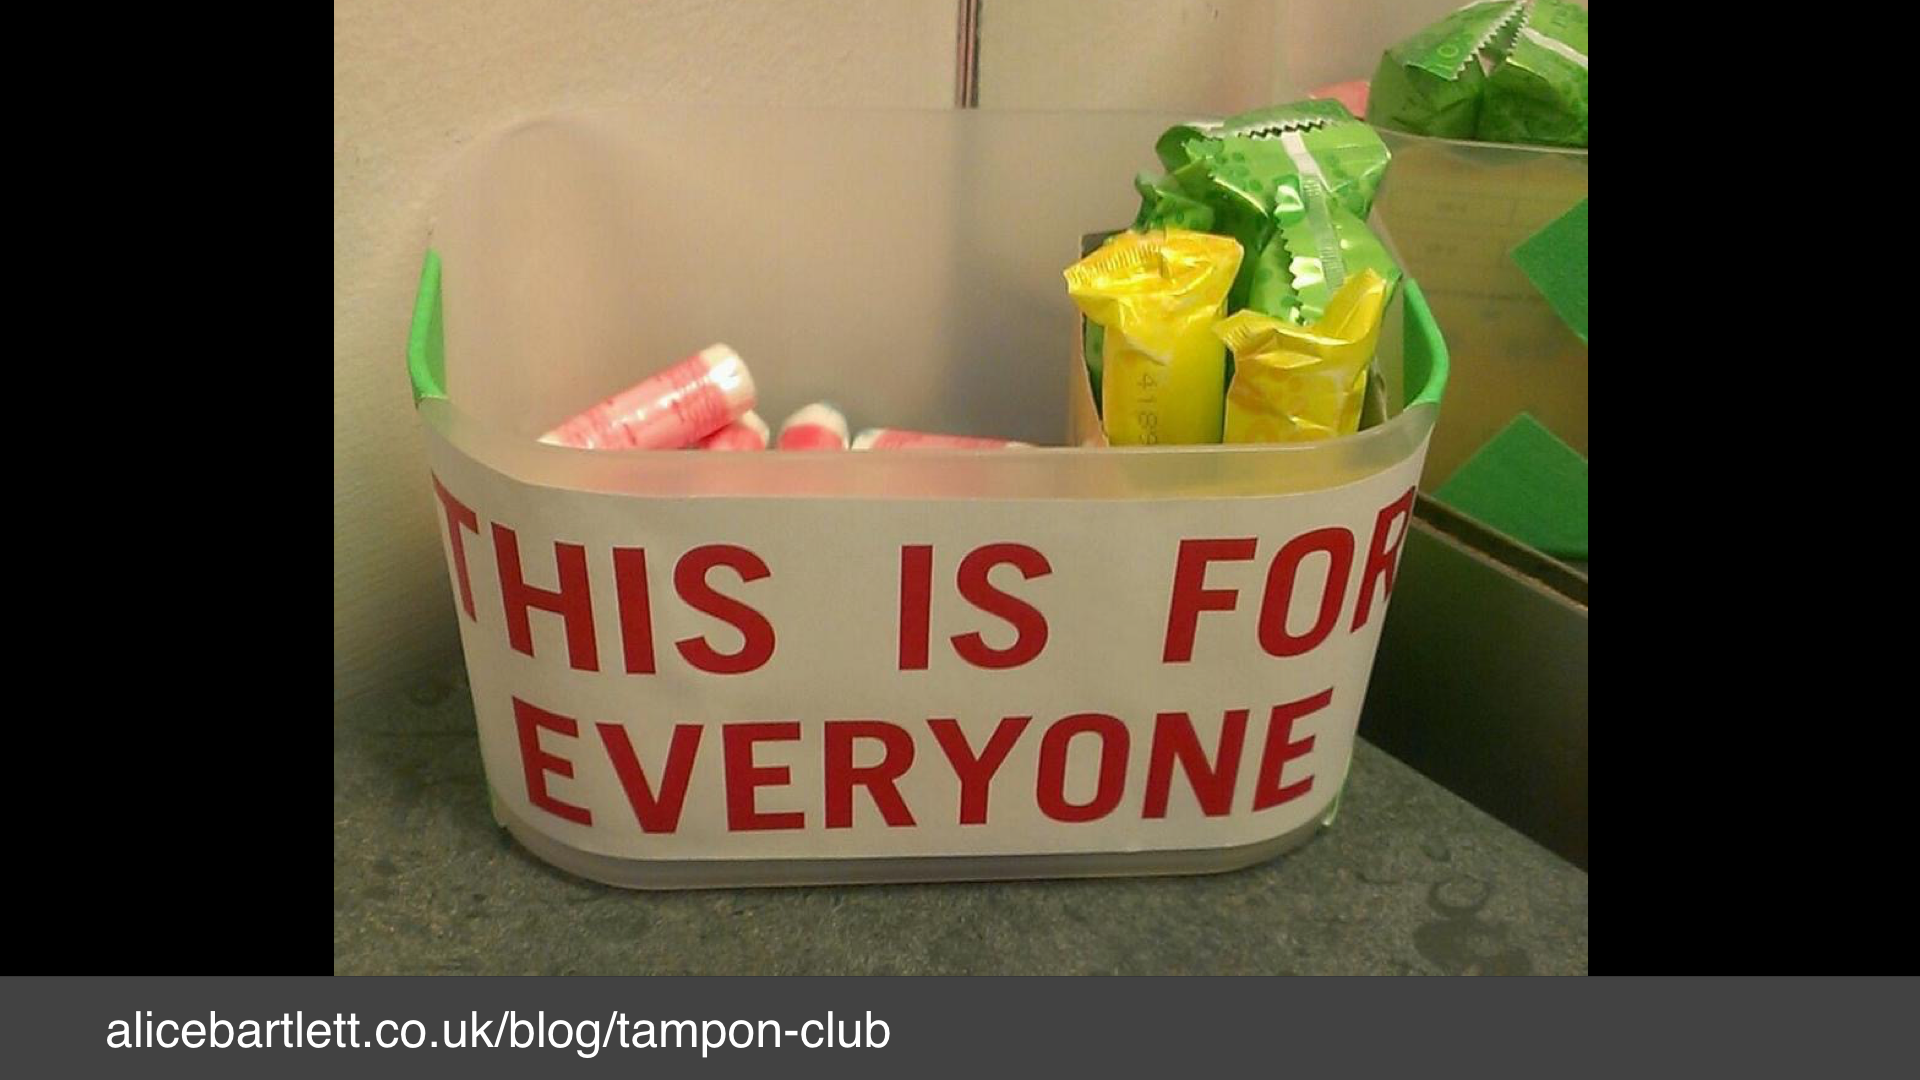 A photo of a basket of tampons with a label: "this is for everyone"